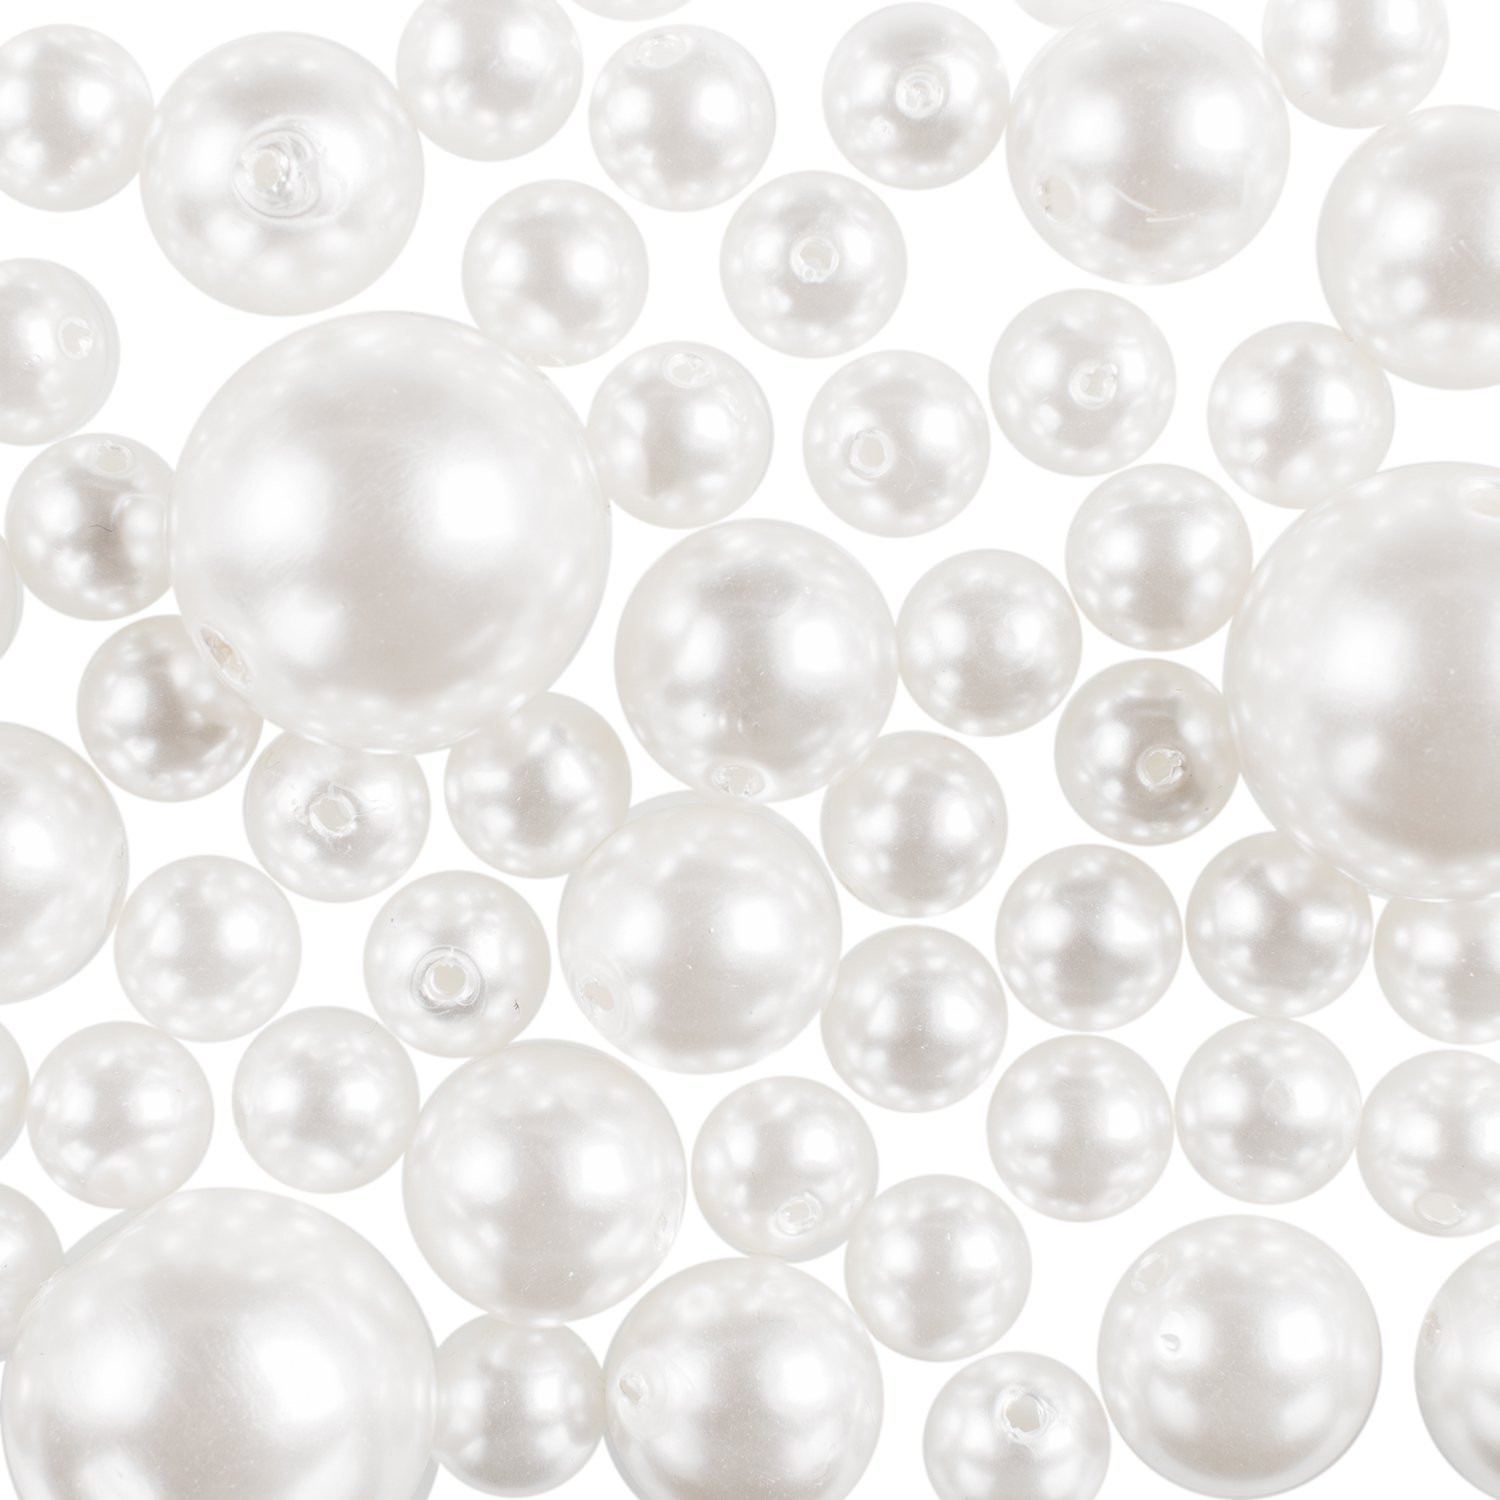 water beads for flower vases of best floating pearls for centerpieces amazon com throughout elegant glossy polished pearl beads for vase fillers diy jewelry necklaces table scatter wedding birthday party home decoration 8 ounce pack